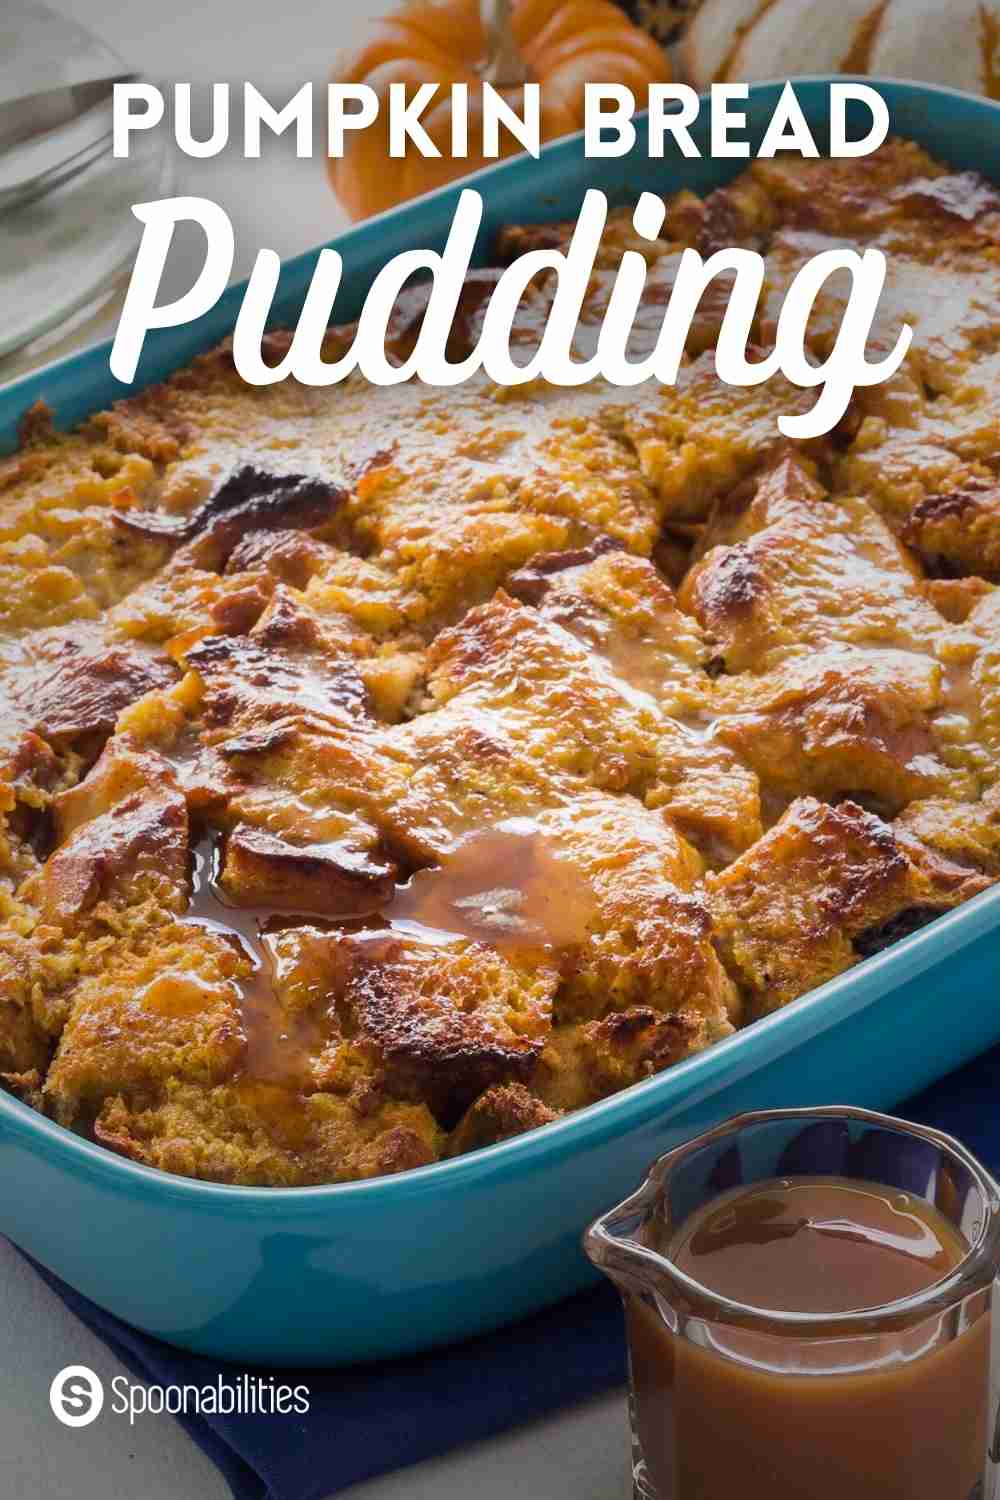 Pumpkin Bread pudding in a blue baking pan drizzled with salted butter caramel